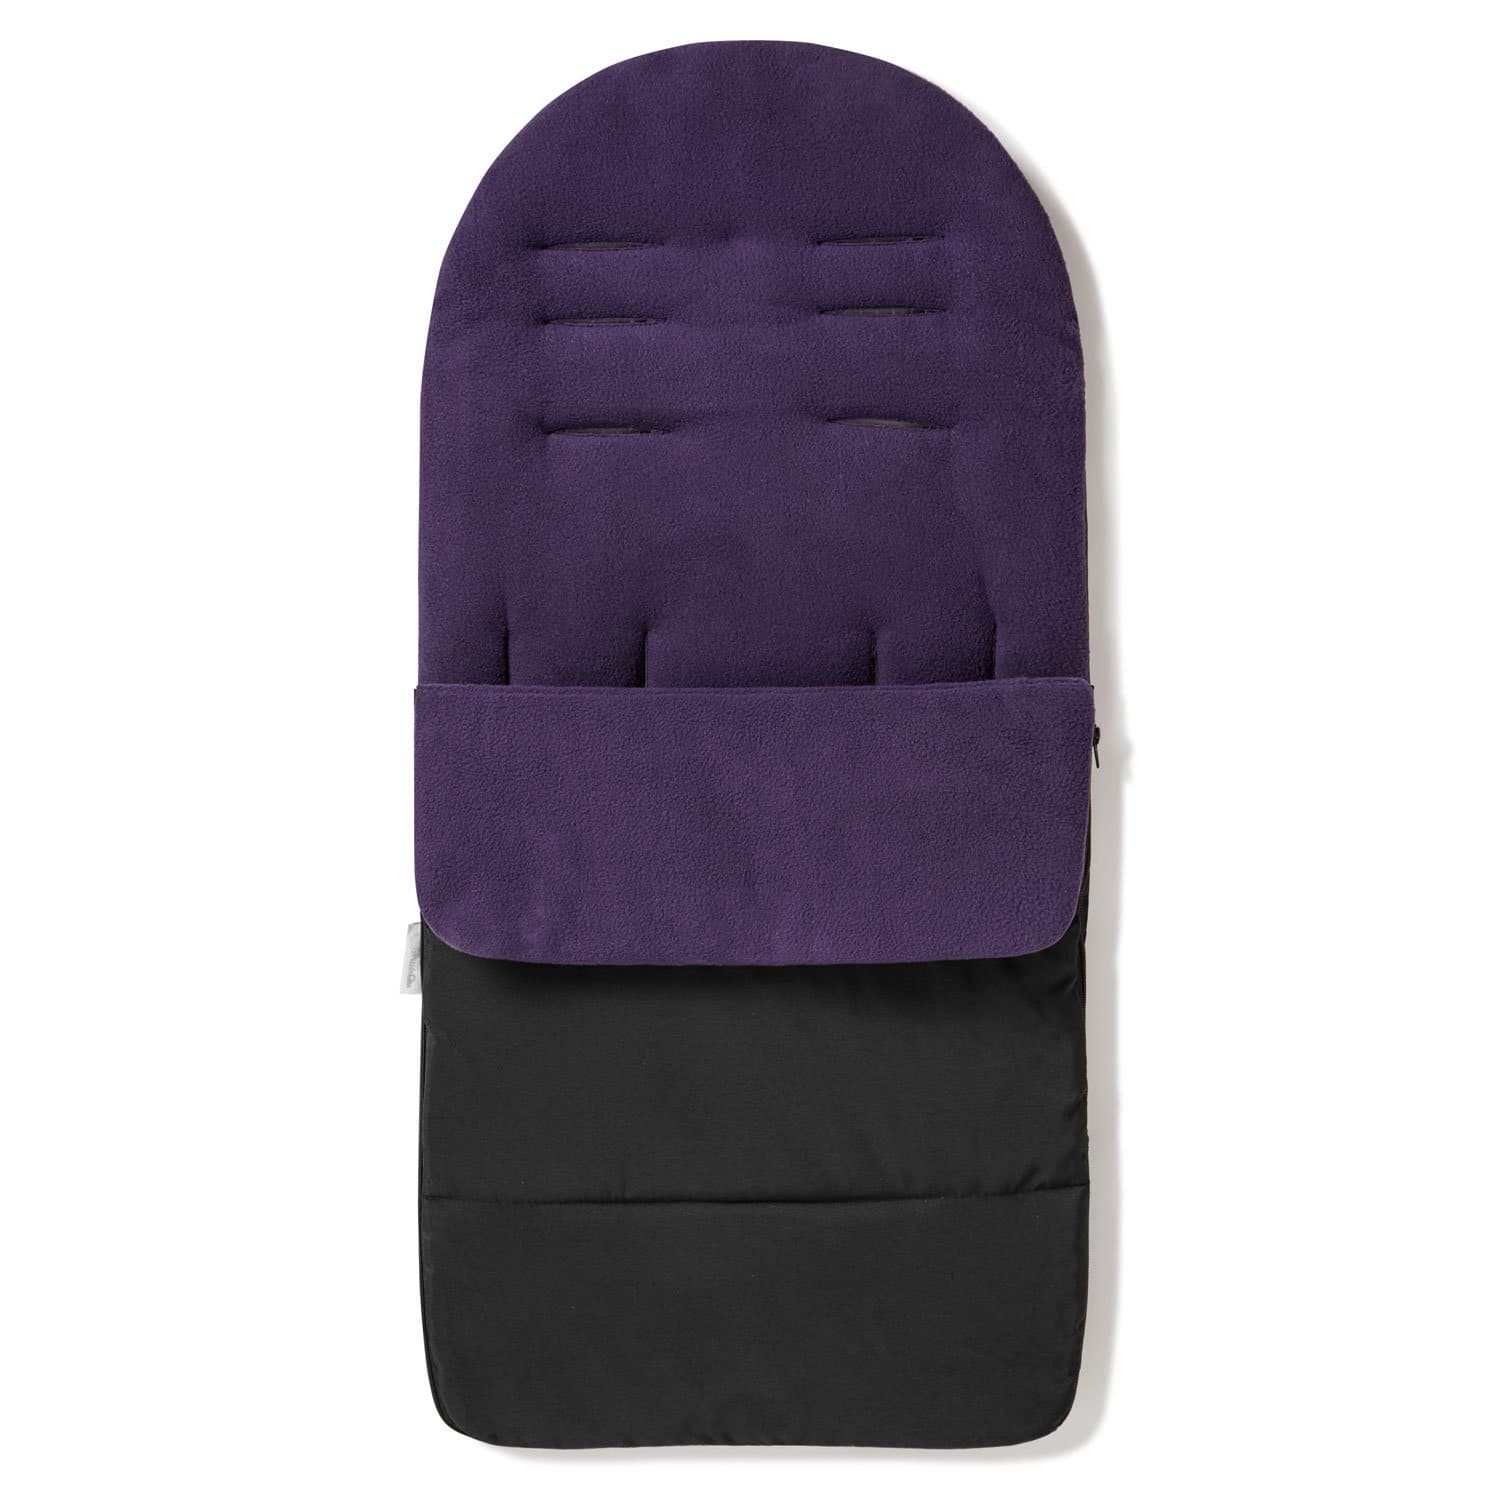 Premium Footmuff / Cosy Toes Compatible with BabySun - Plum Purple / Fits All Models | For Your Little One